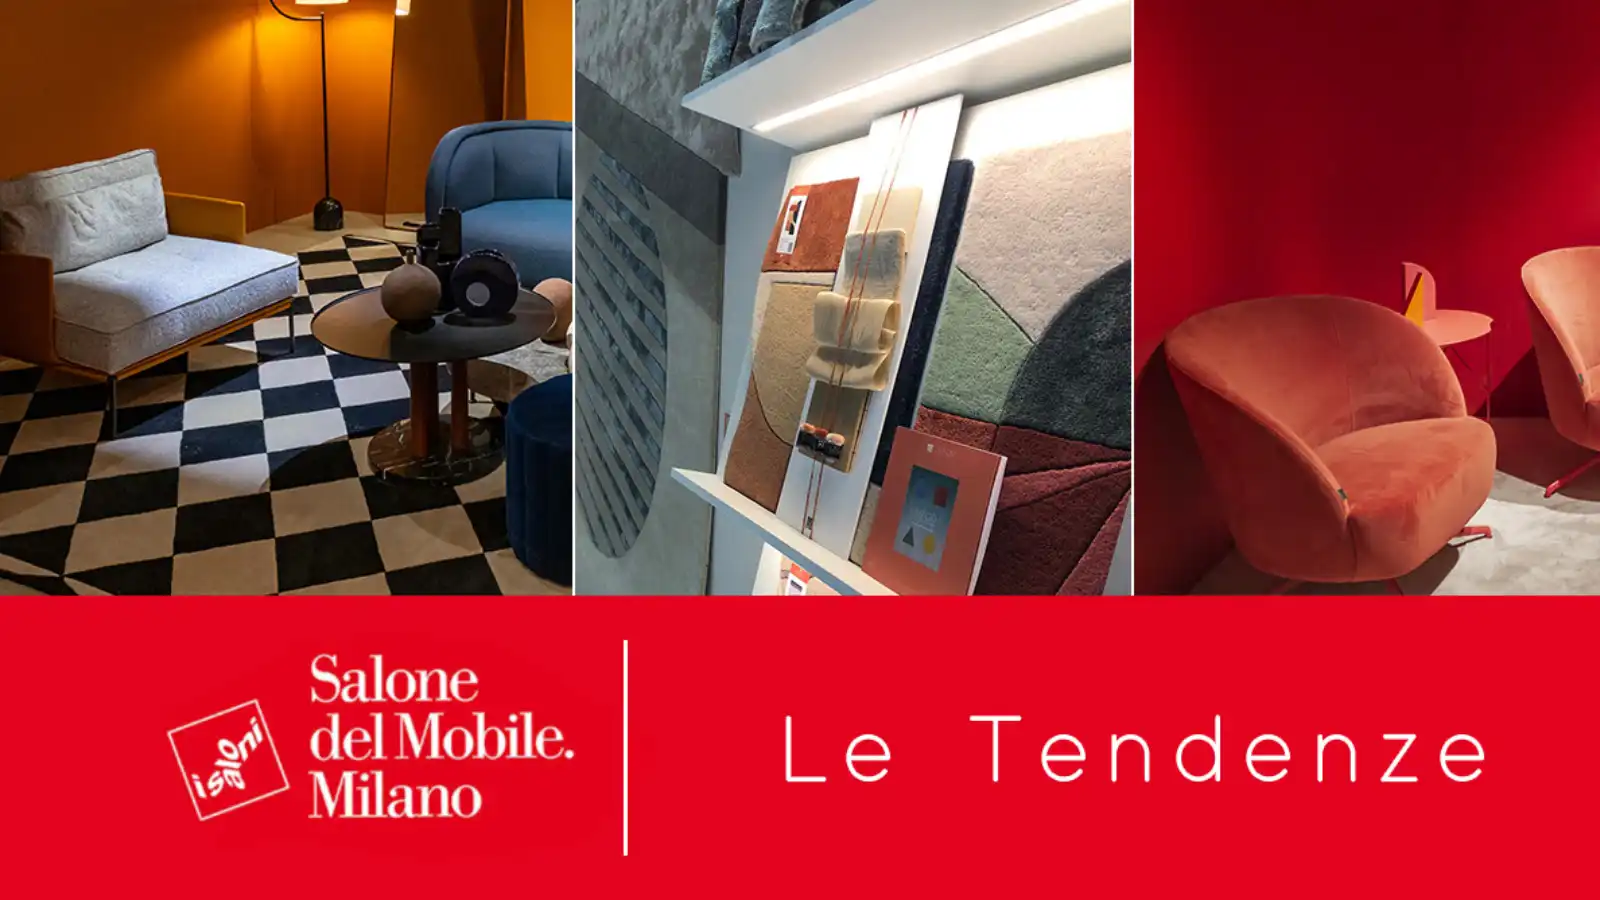 The Salone del Mobile as seen by us - Trends